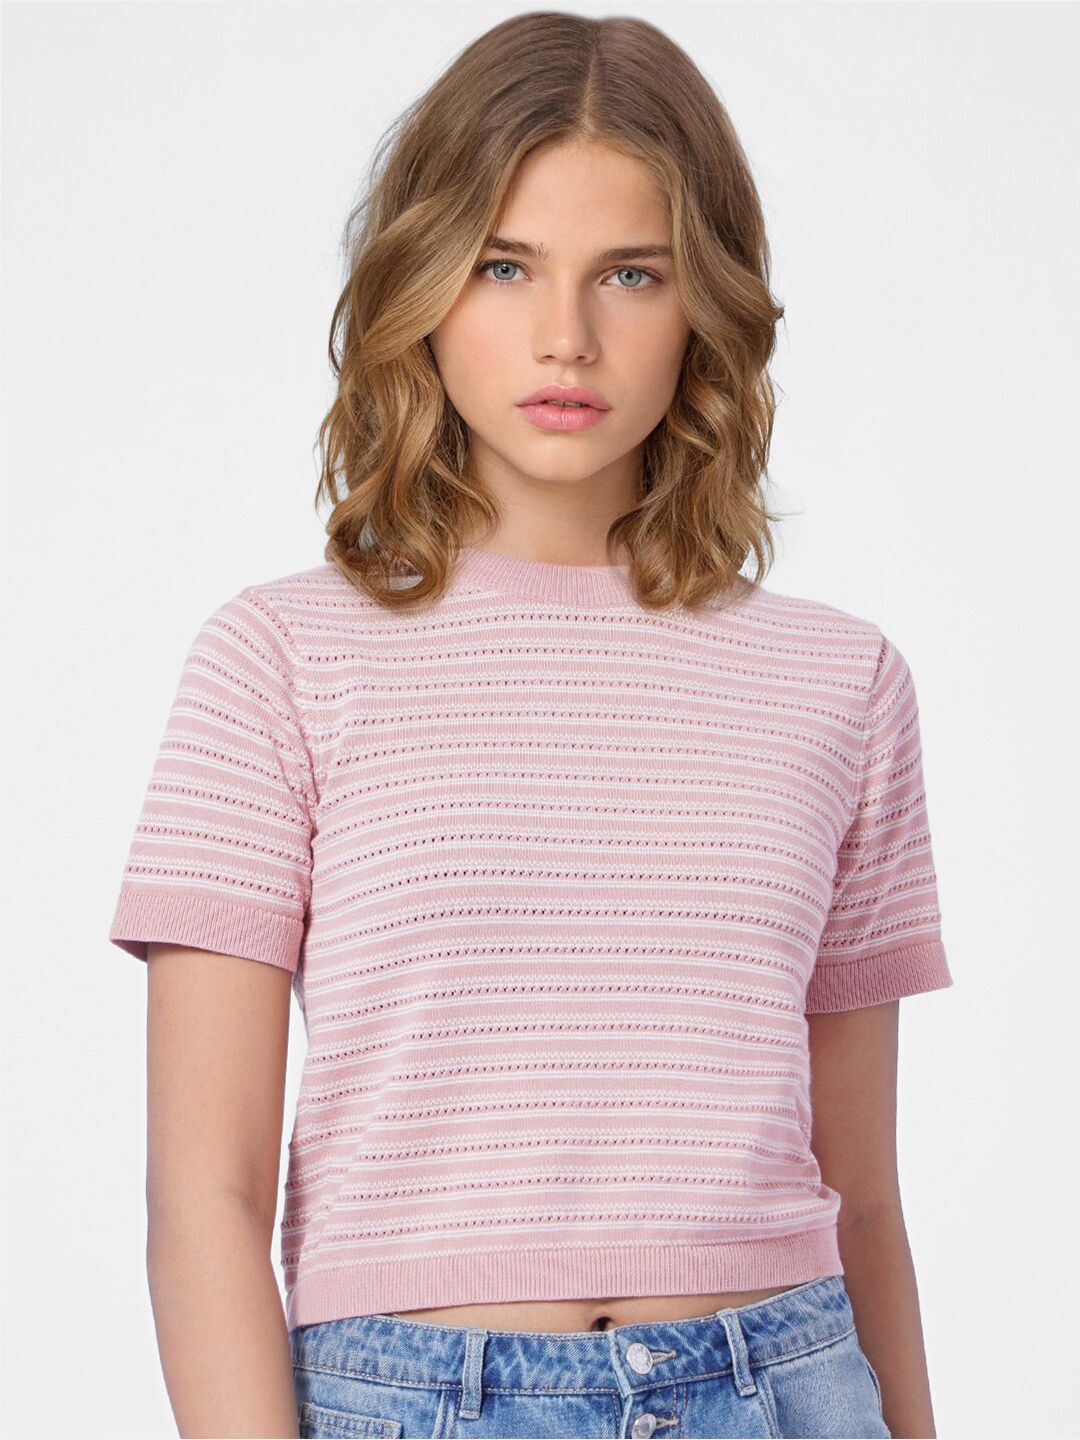 ONLY Women Pink & White Striped Top Price in India